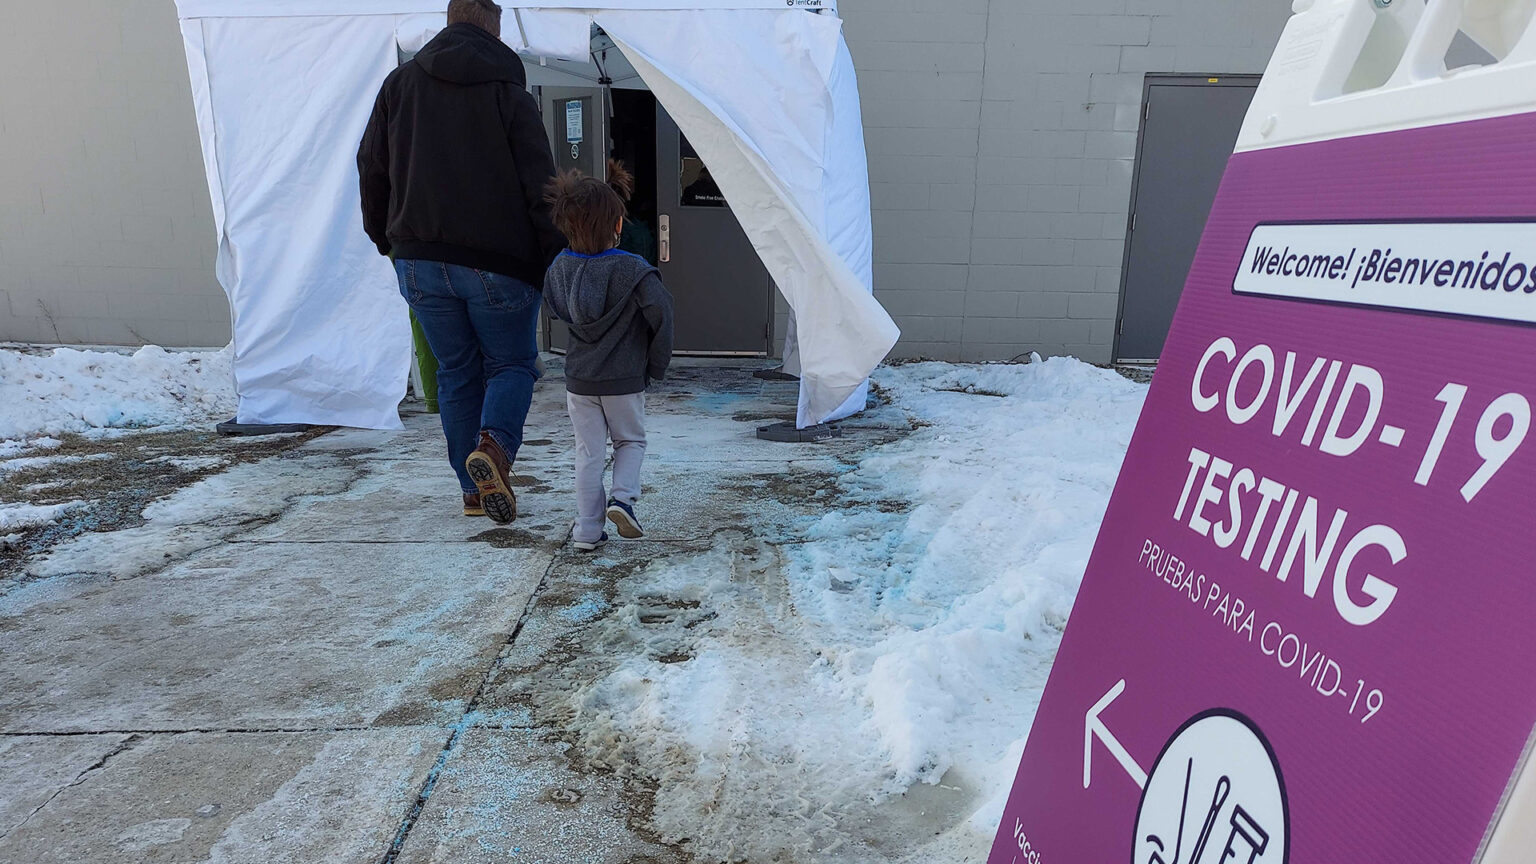 An adult and child walk on an icy sidewalk toward doors covered by an entrance tent, with a sign at right noting the location of COVID-19 testing.